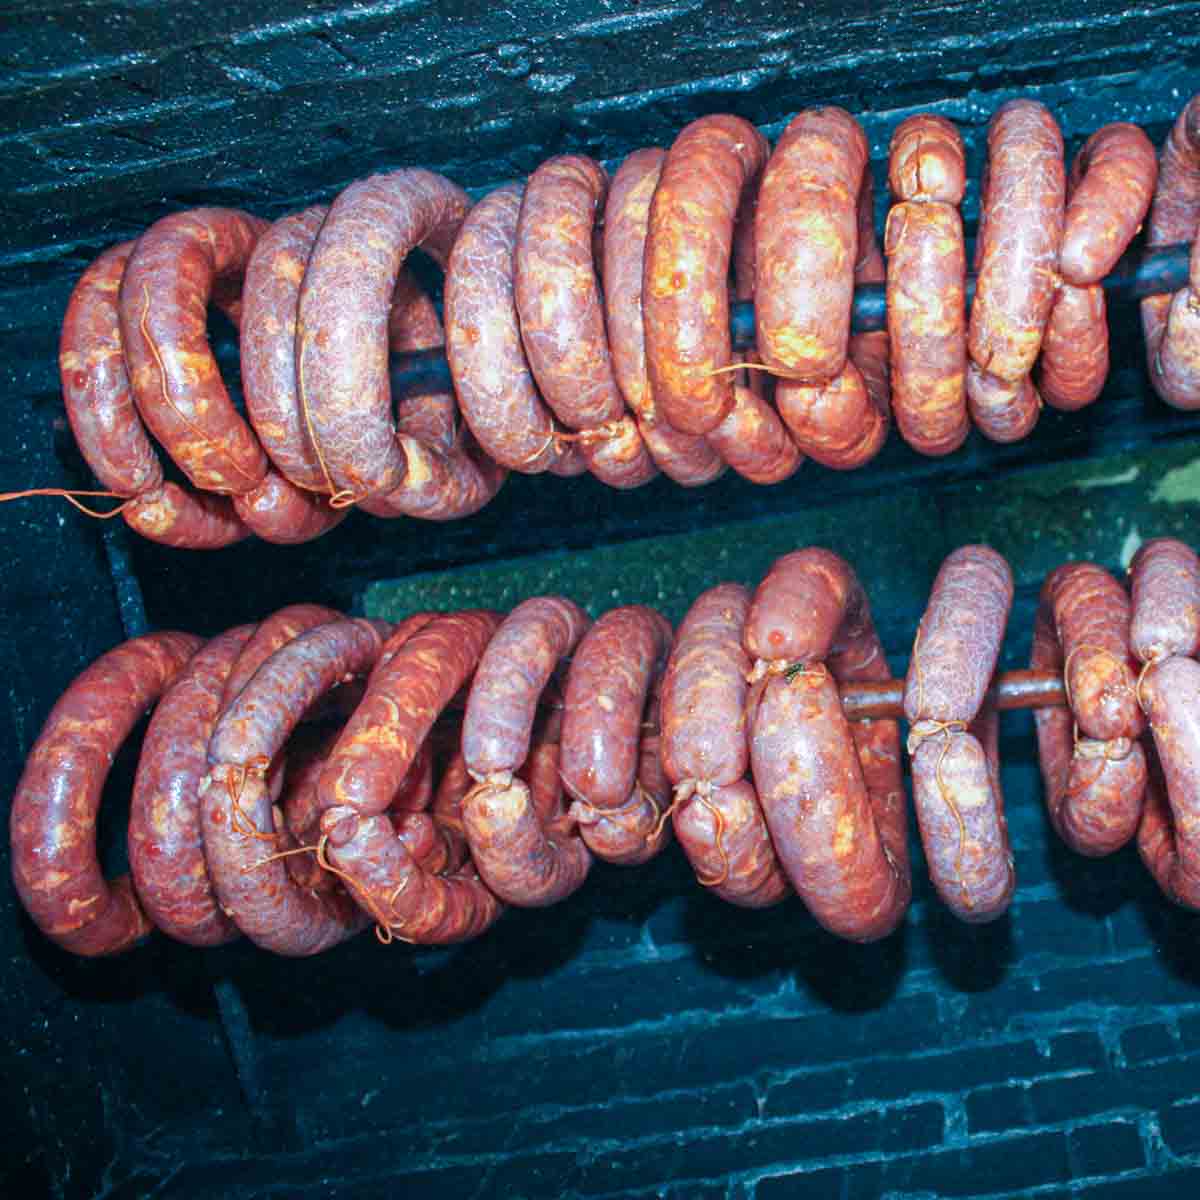 Portuguese sausage are being smoked in smoker outside